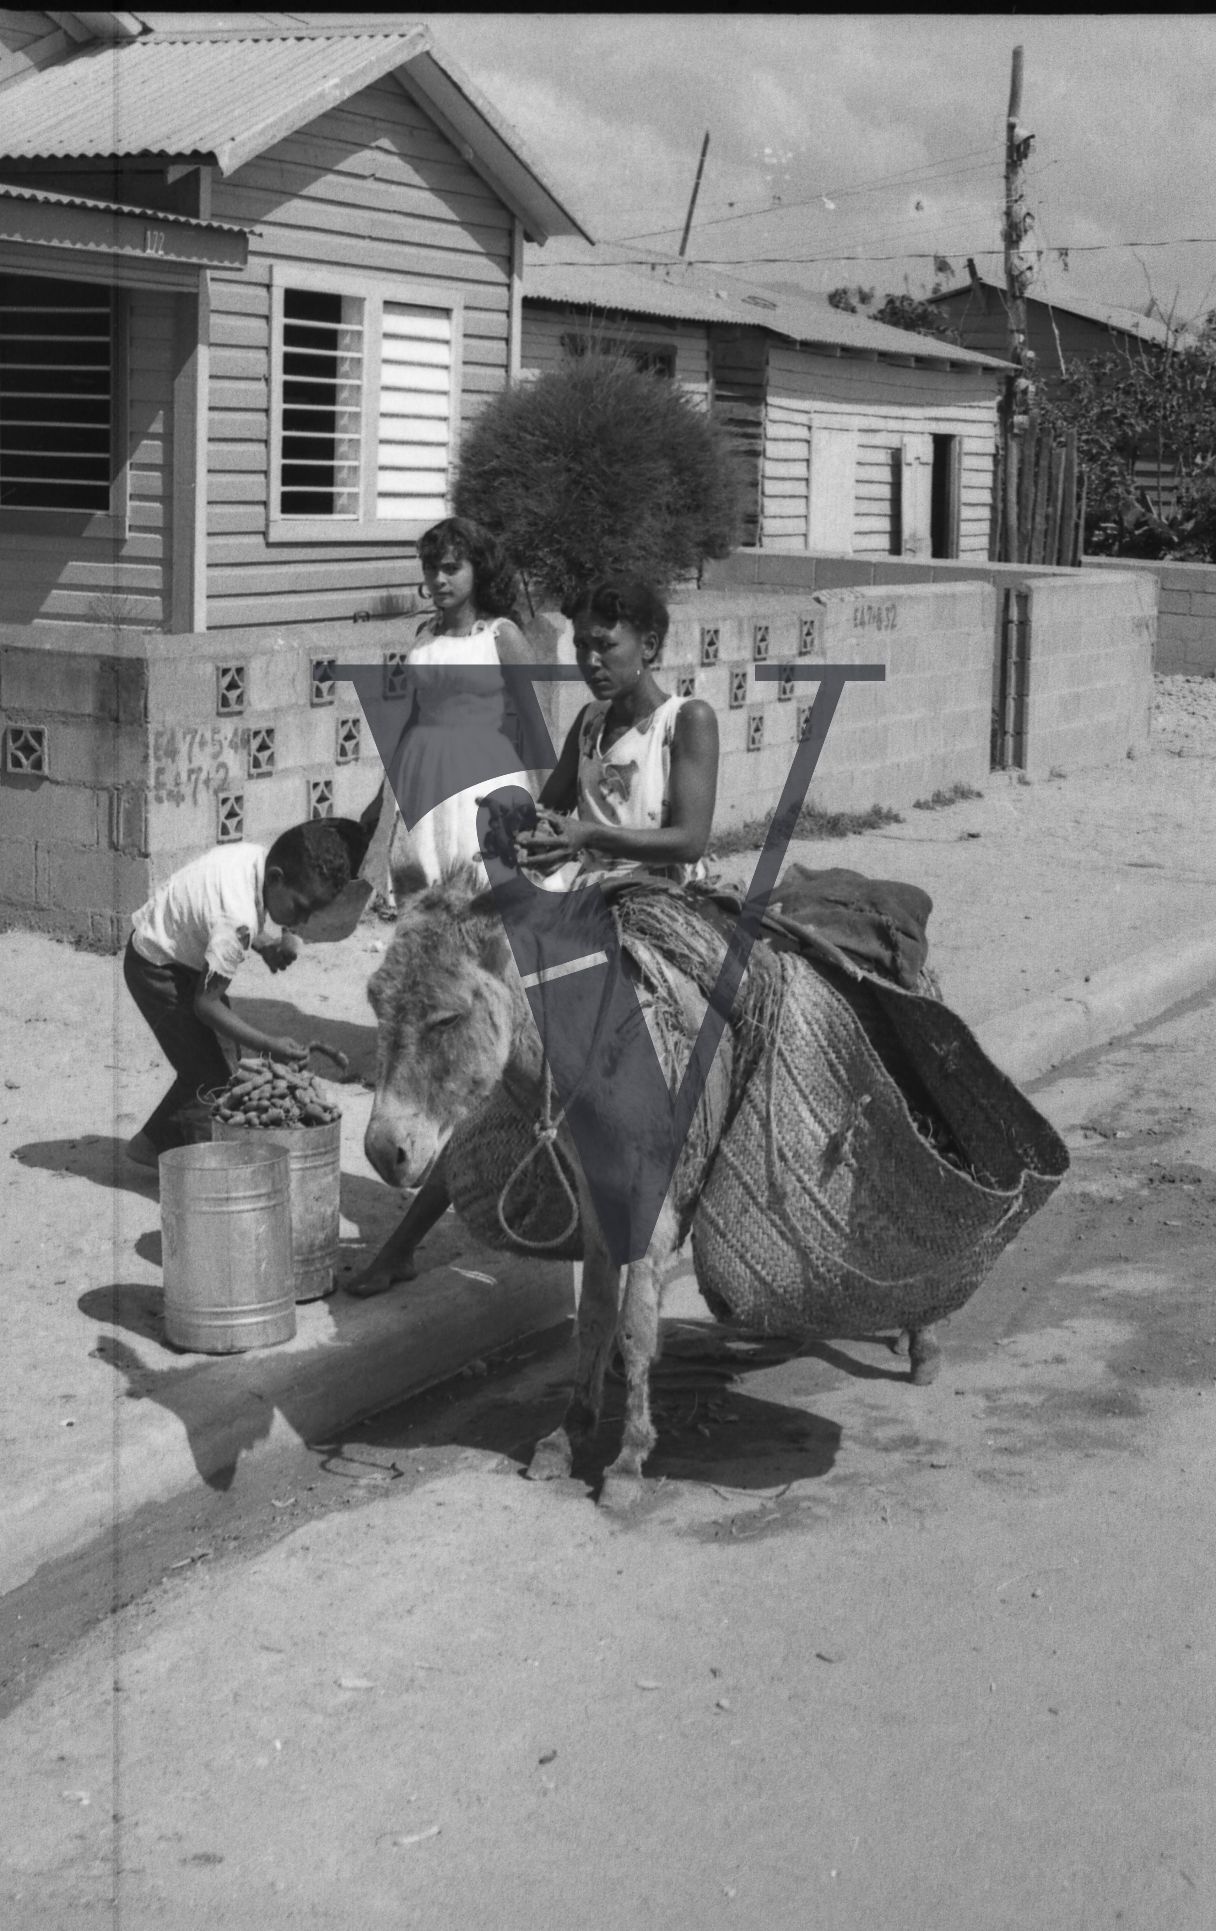 Dominican Republic, women and children with donkey.